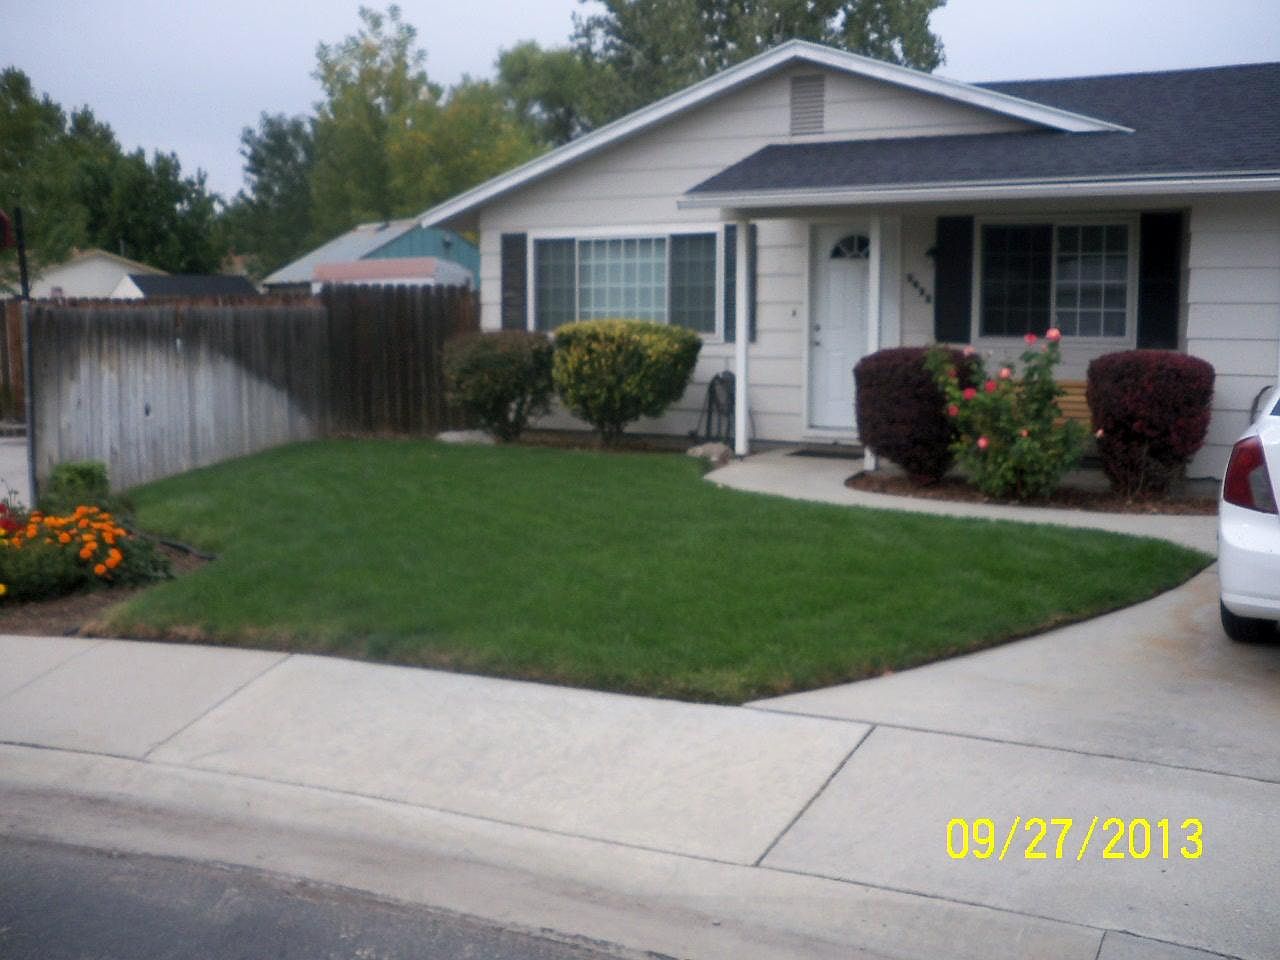 2432 S Virginia St Boise Id 83705 Zillow